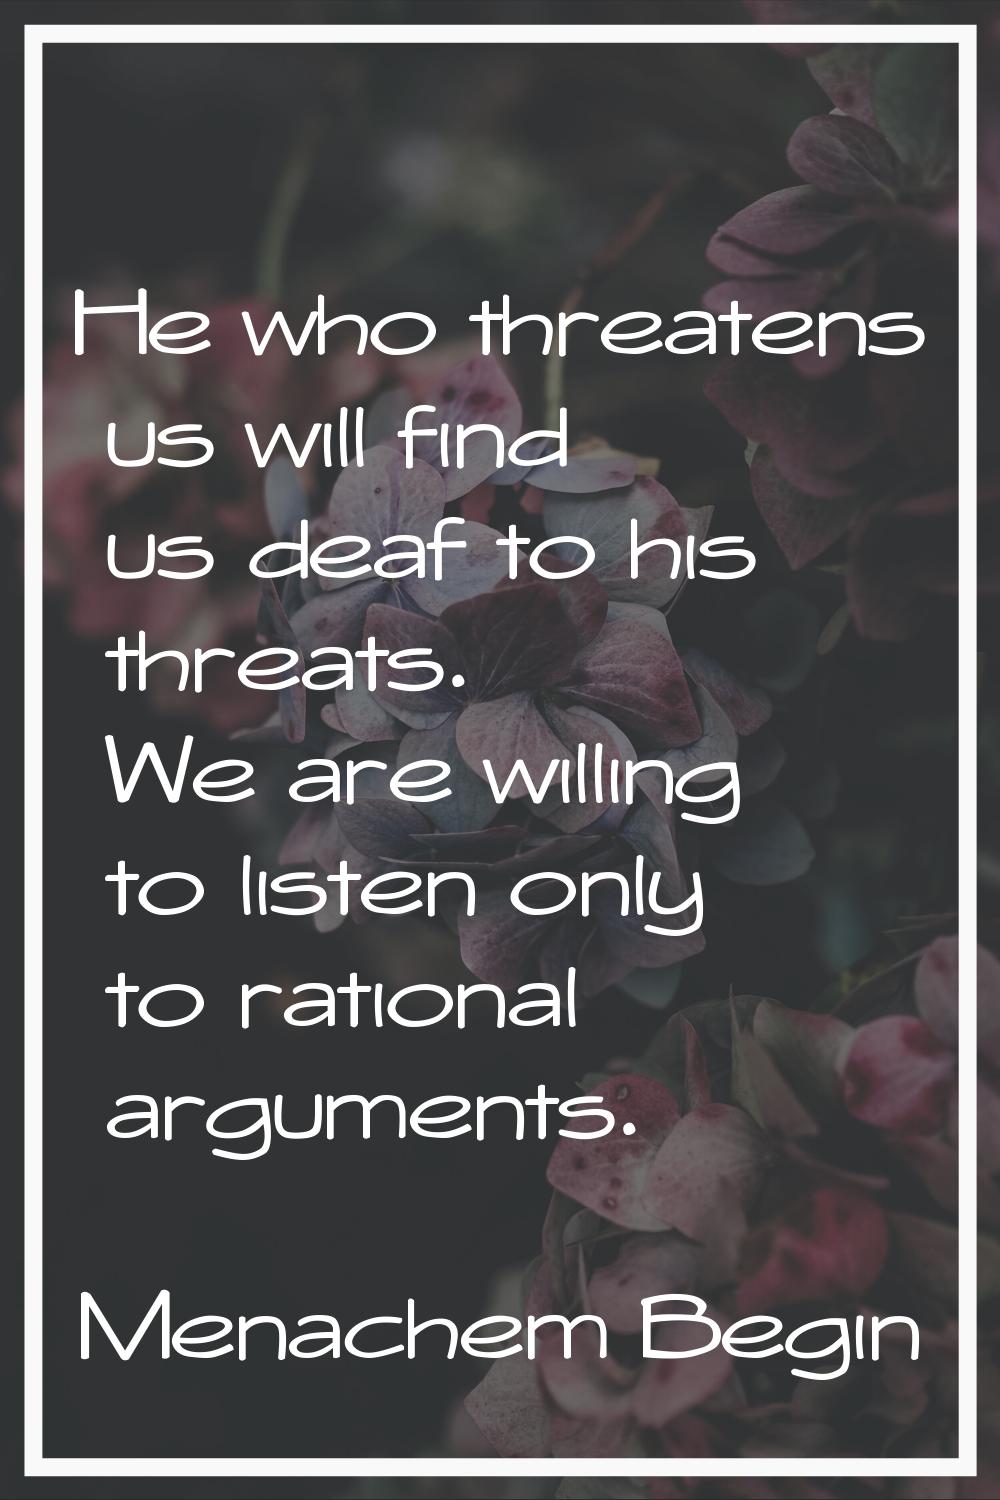 He who threatens us will find us deaf to his threats. We are willing to listen only to rational arg